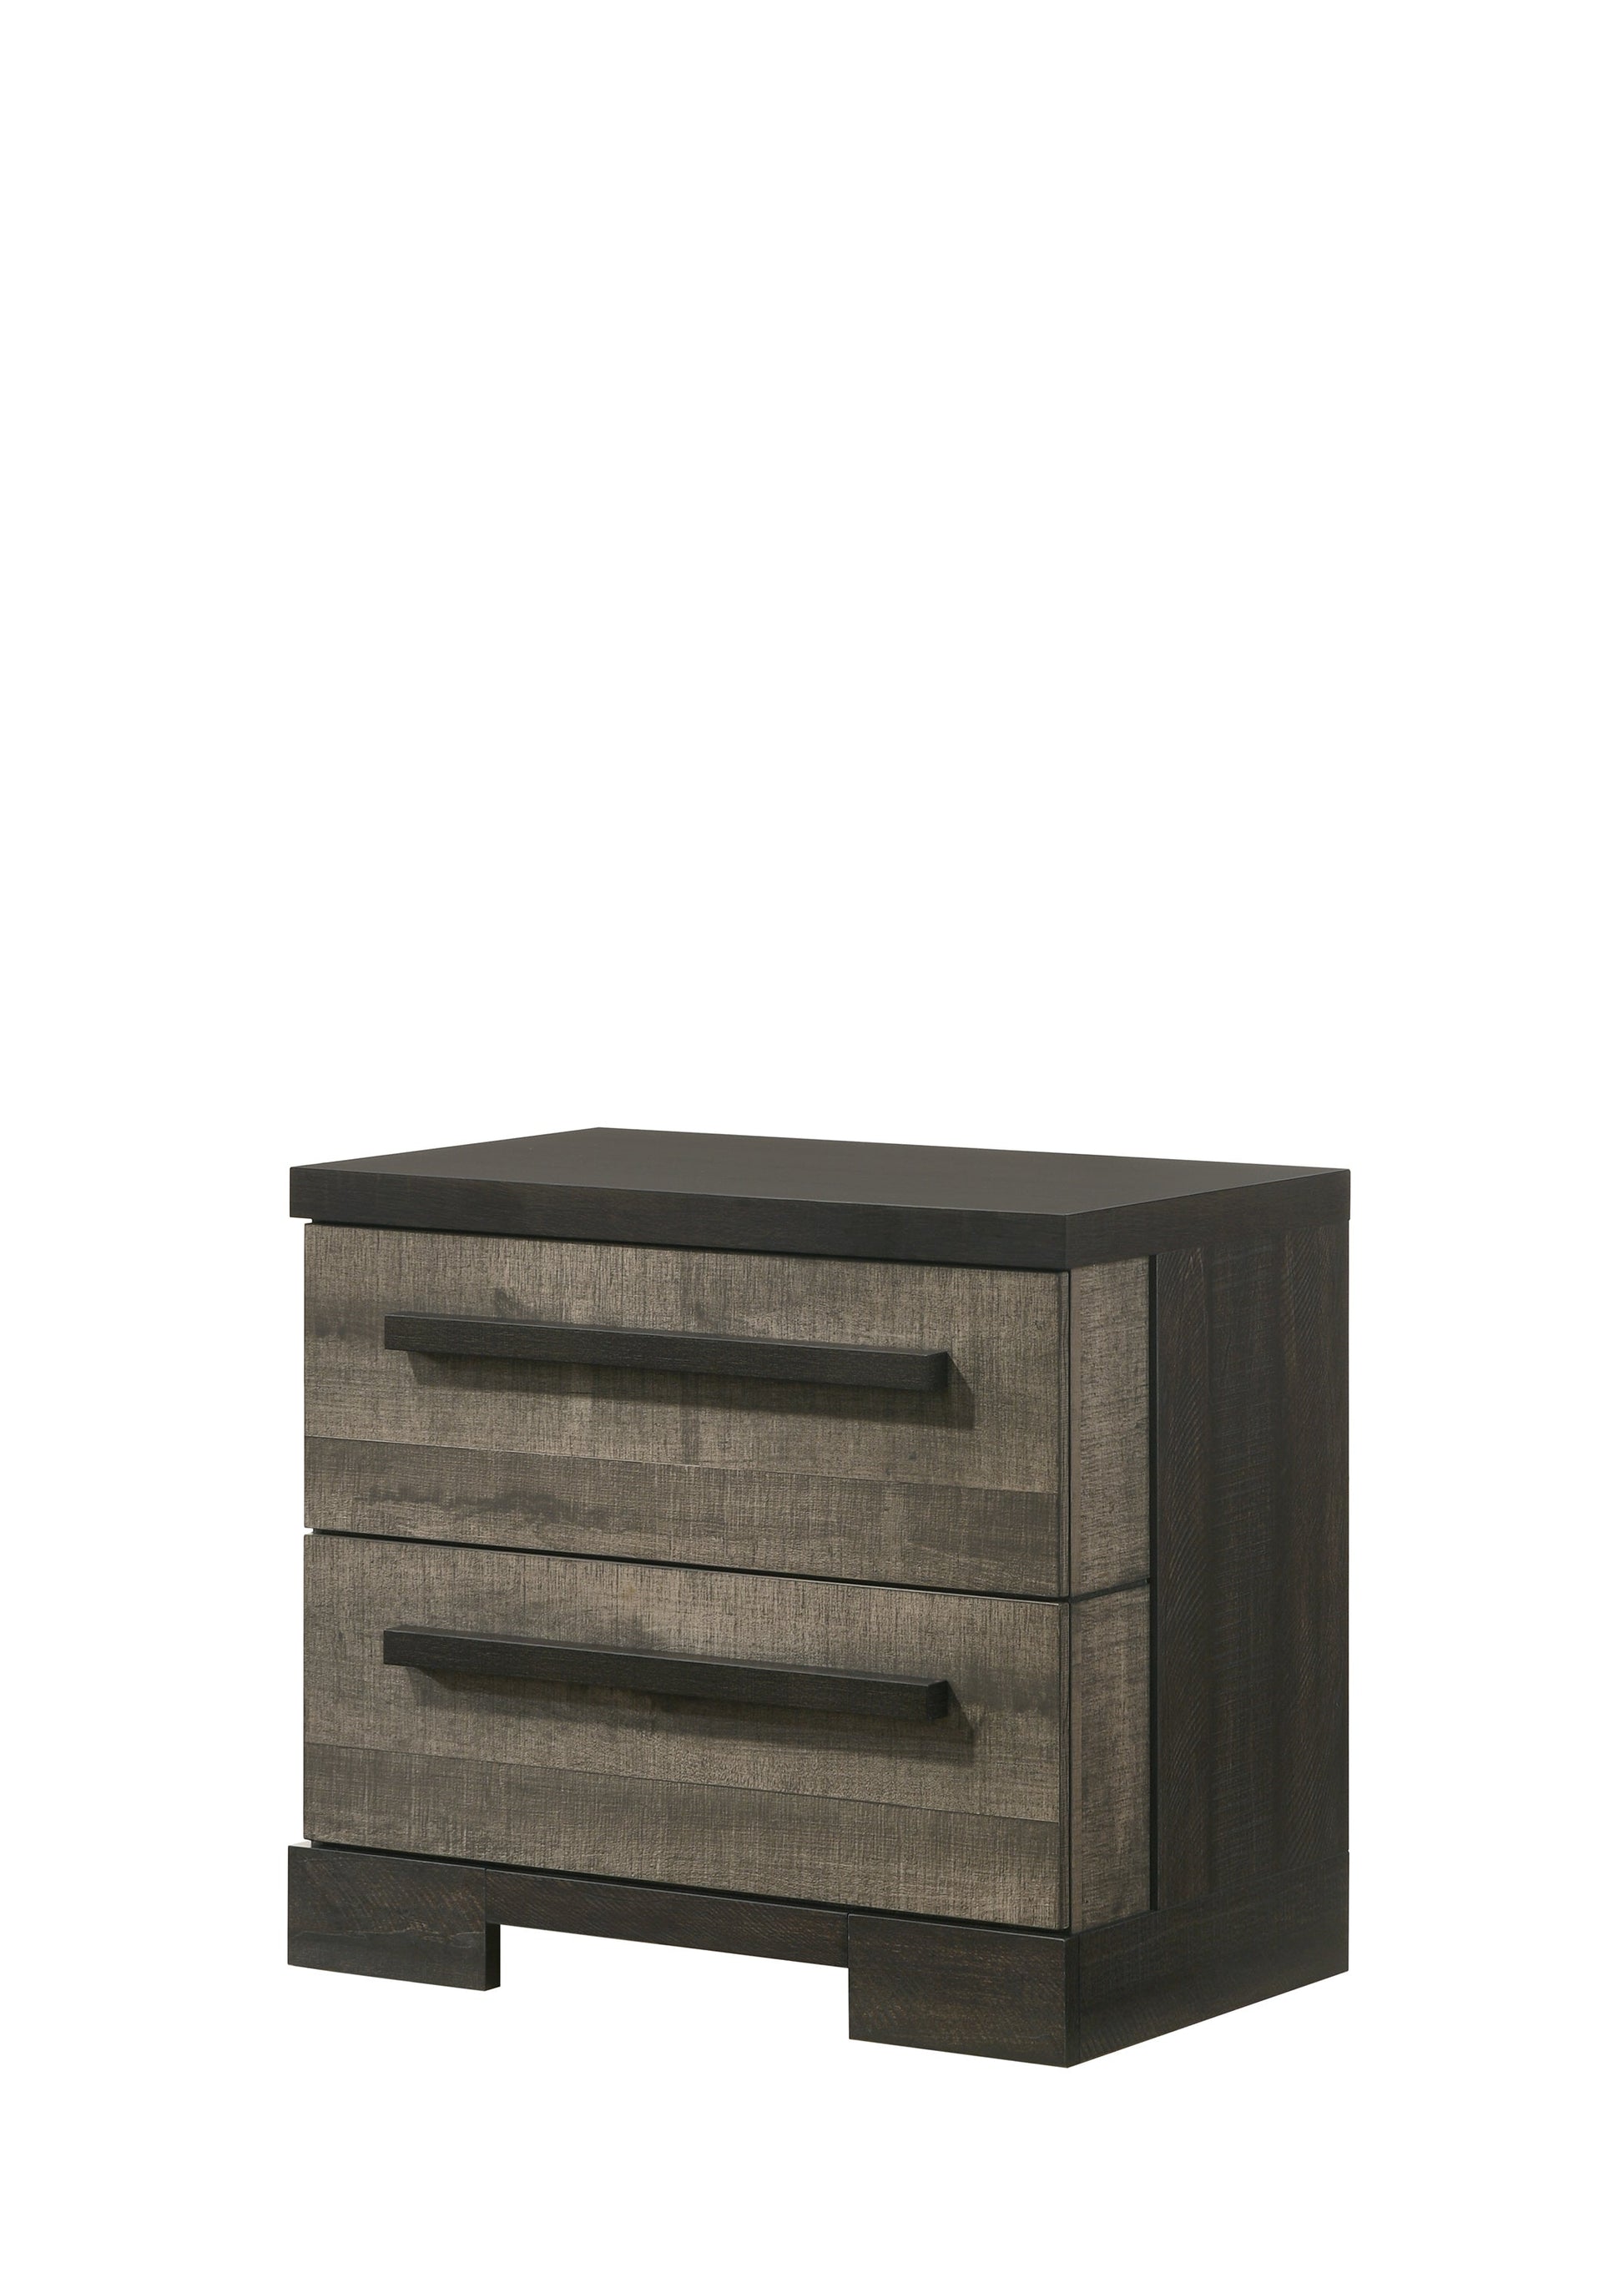 Remington Gray Modern Contemporary Solid Wood And Veneers Upholstered Panel Bedroom Set